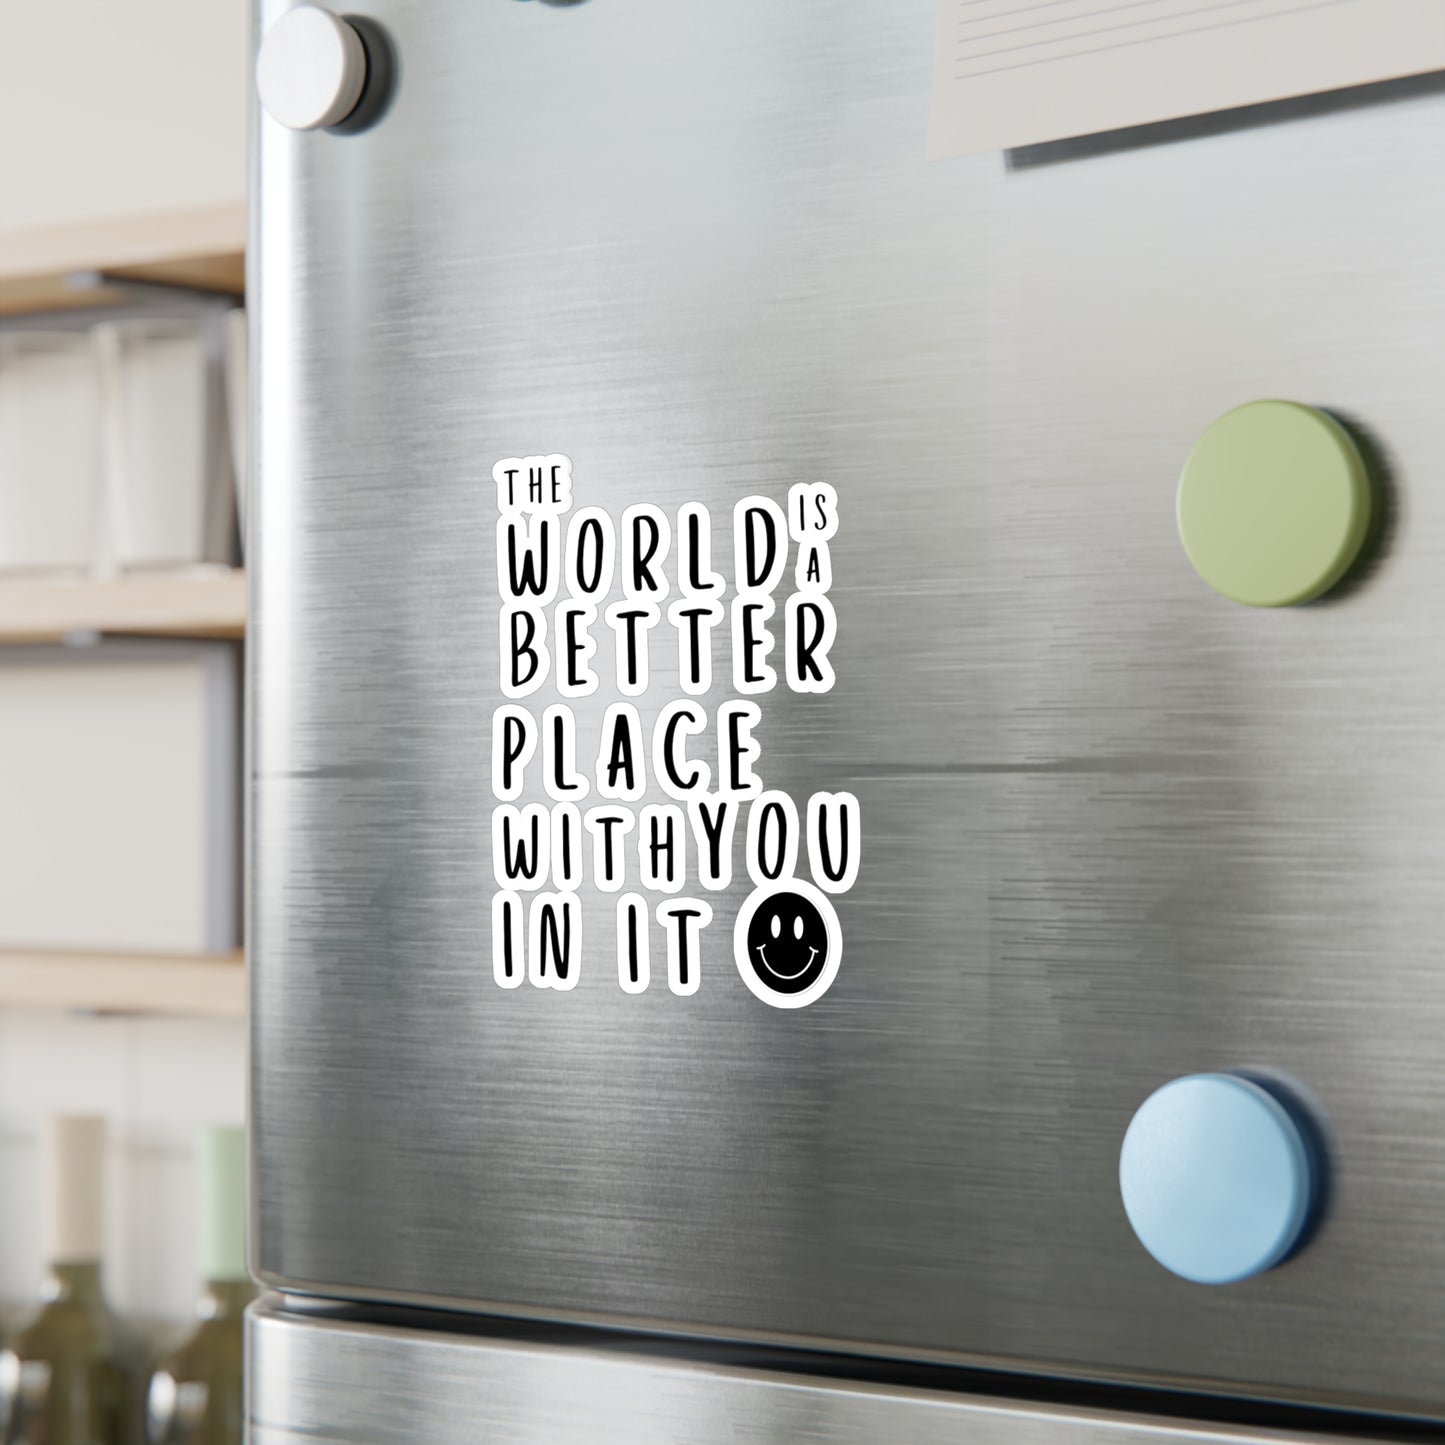 Smile: The World is a Better Place With You Vinyl Decals